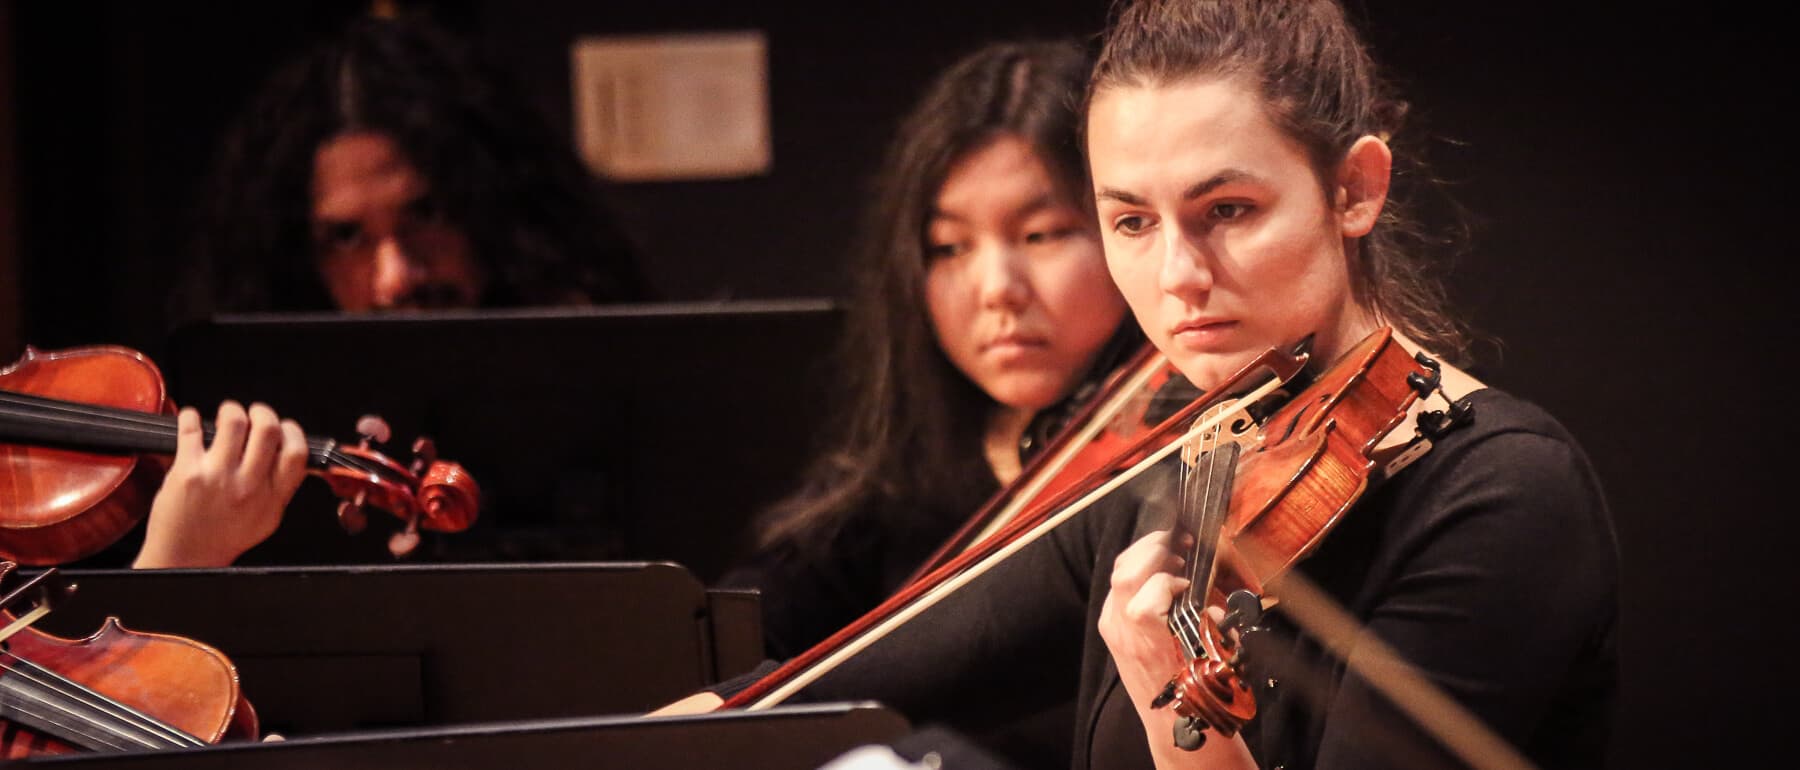 UWGB students perform in an orchestra on stage.